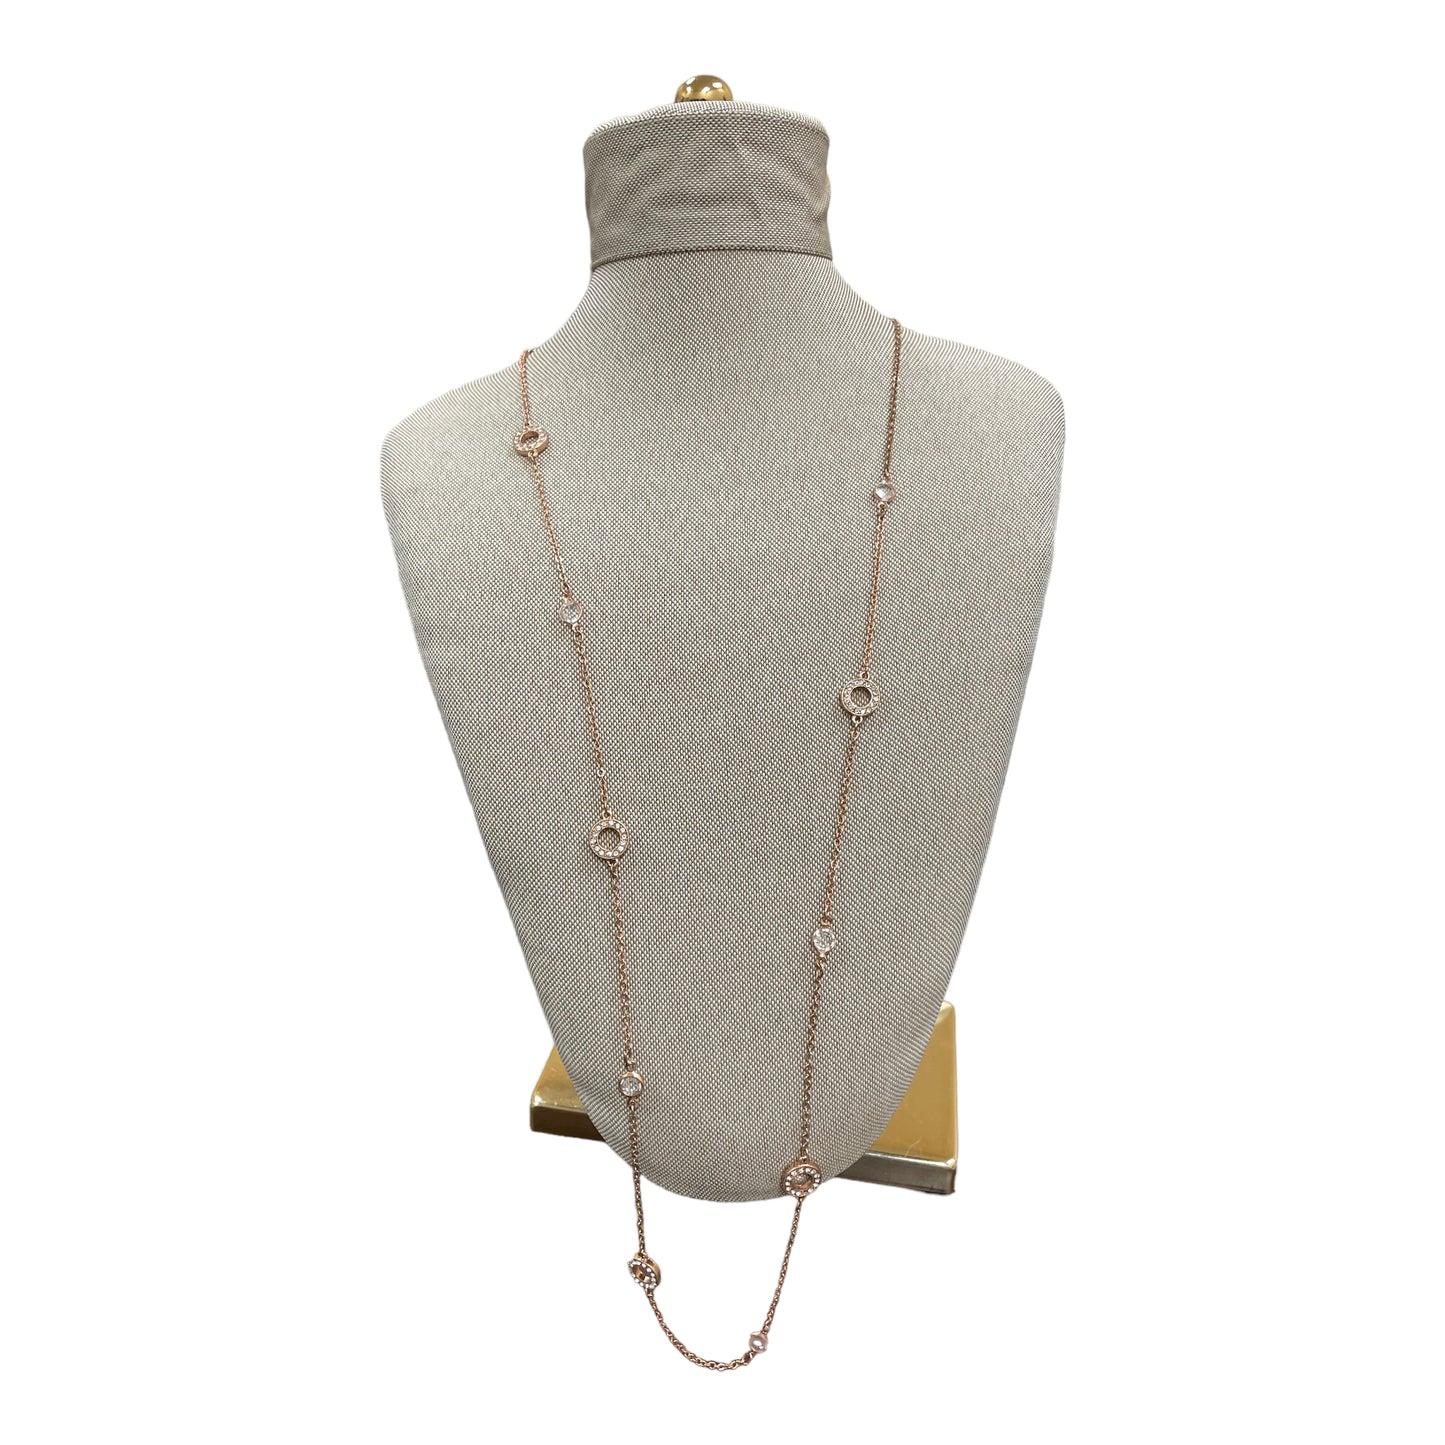 Necklace Chain By Cme